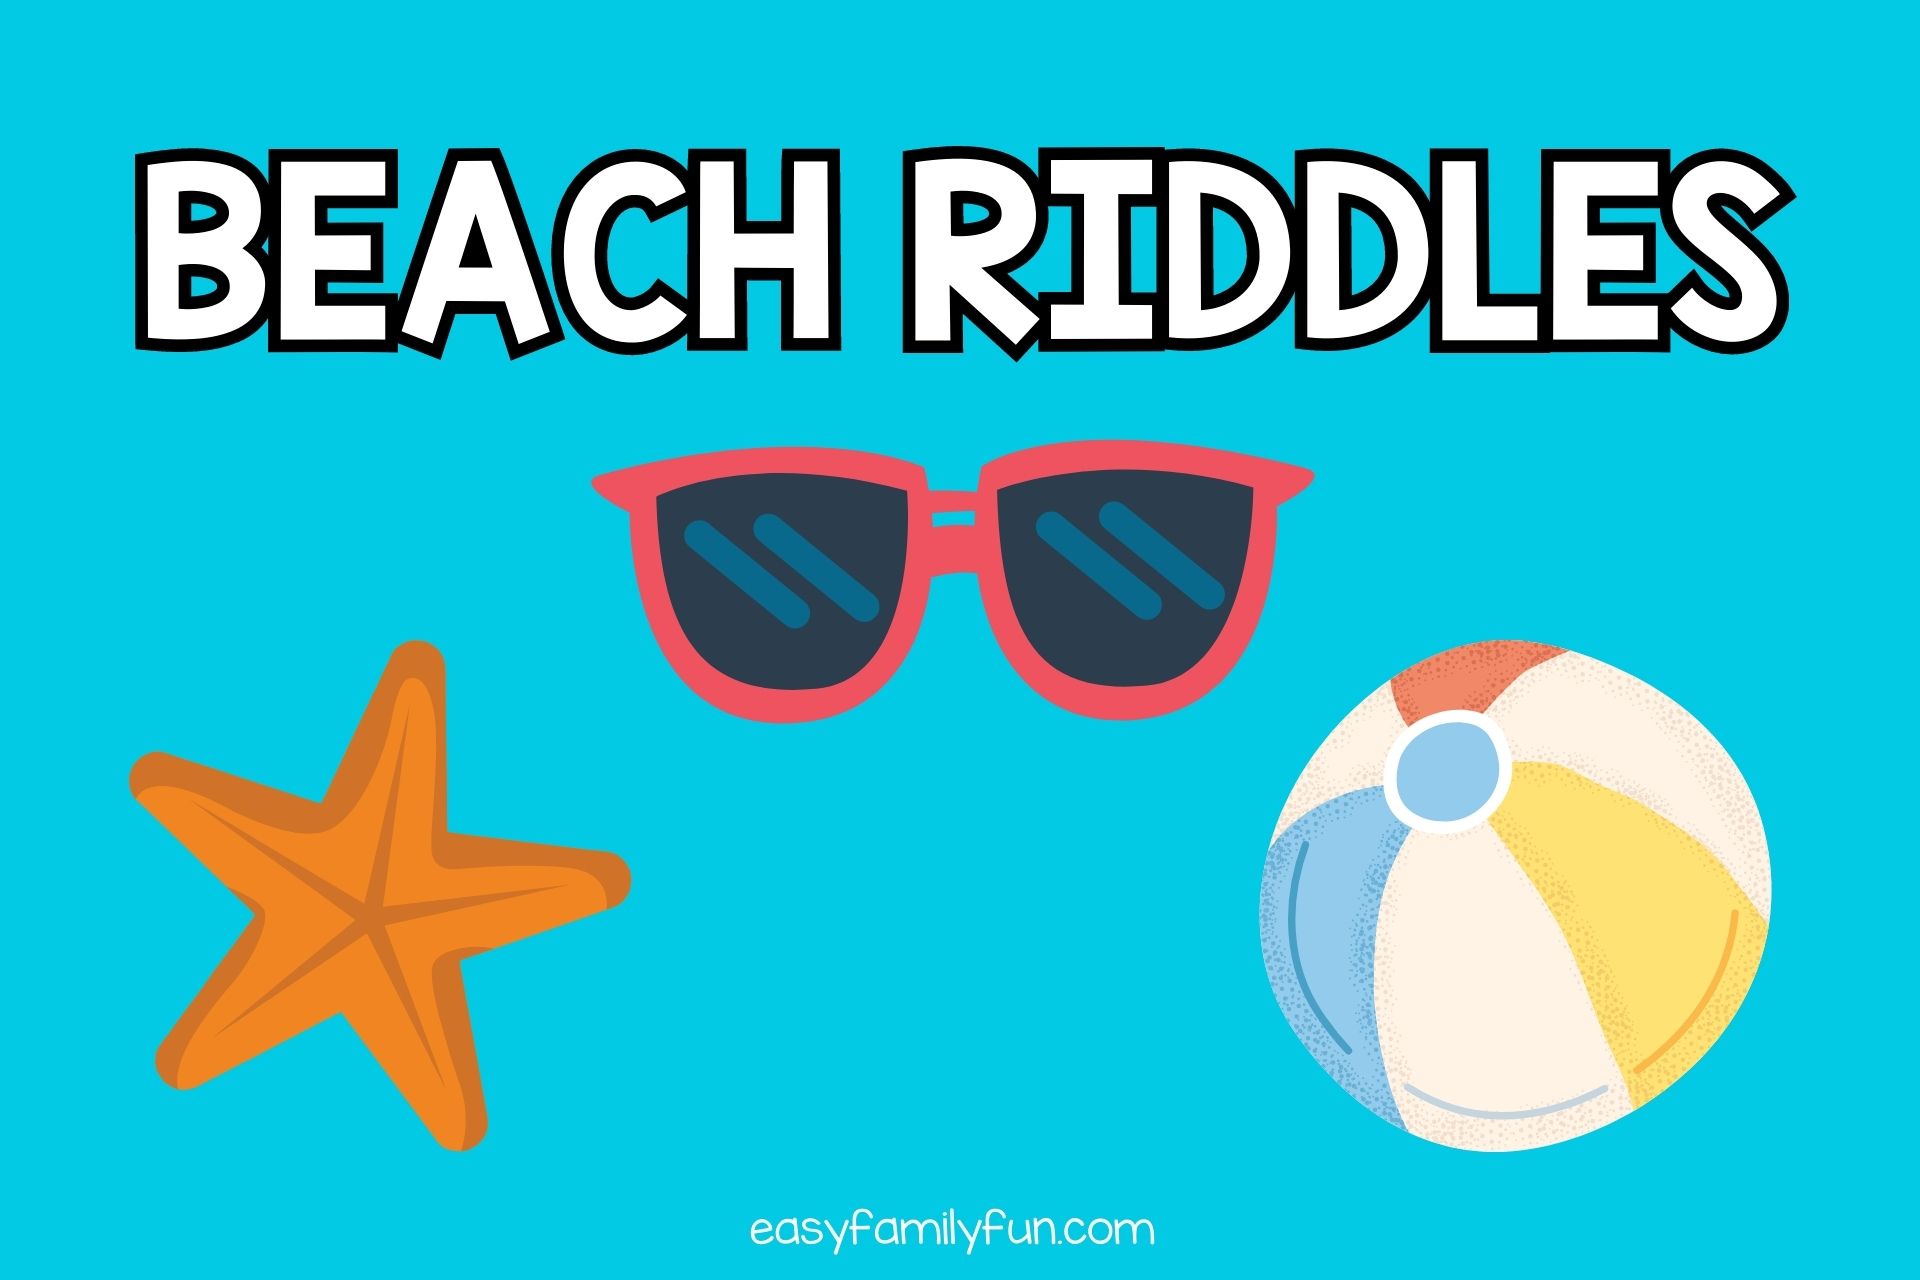 beach riddles written on blue background with star fish, sunglasses, and beach ball